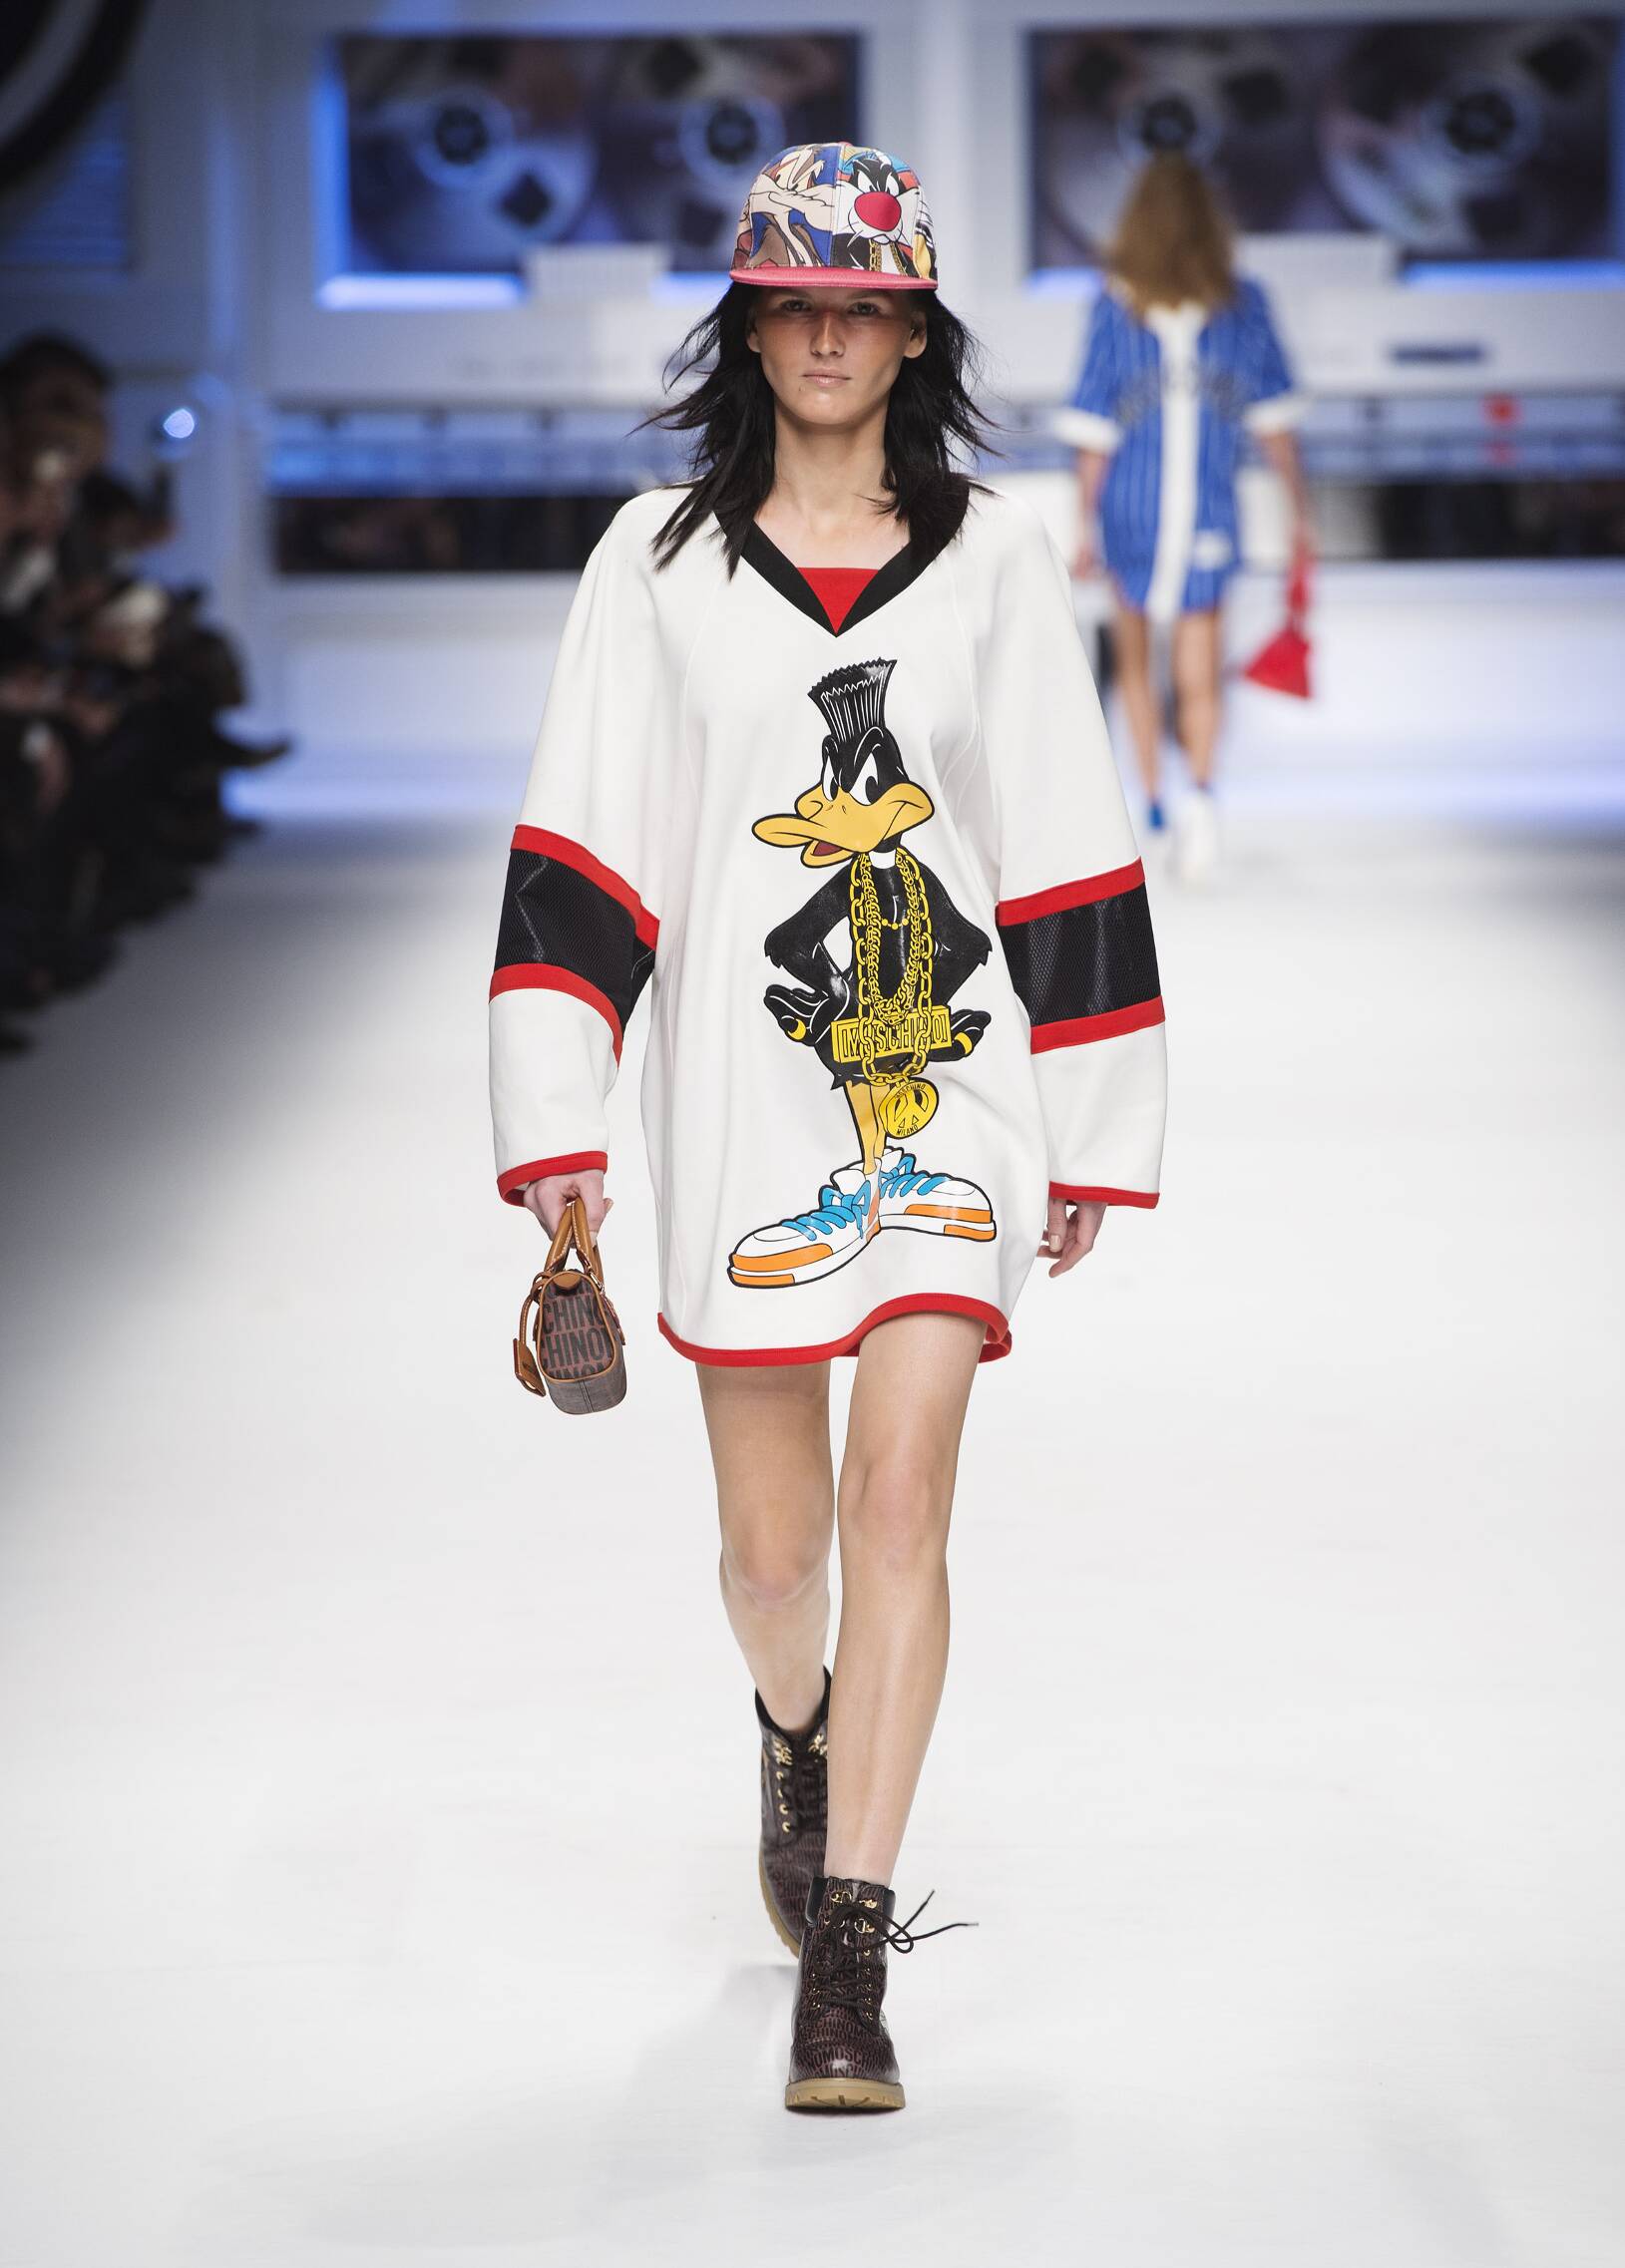 MOSCHINO FALL WINTER 2015-16 WOMEN'S COLLECTION | The Skinny Beep